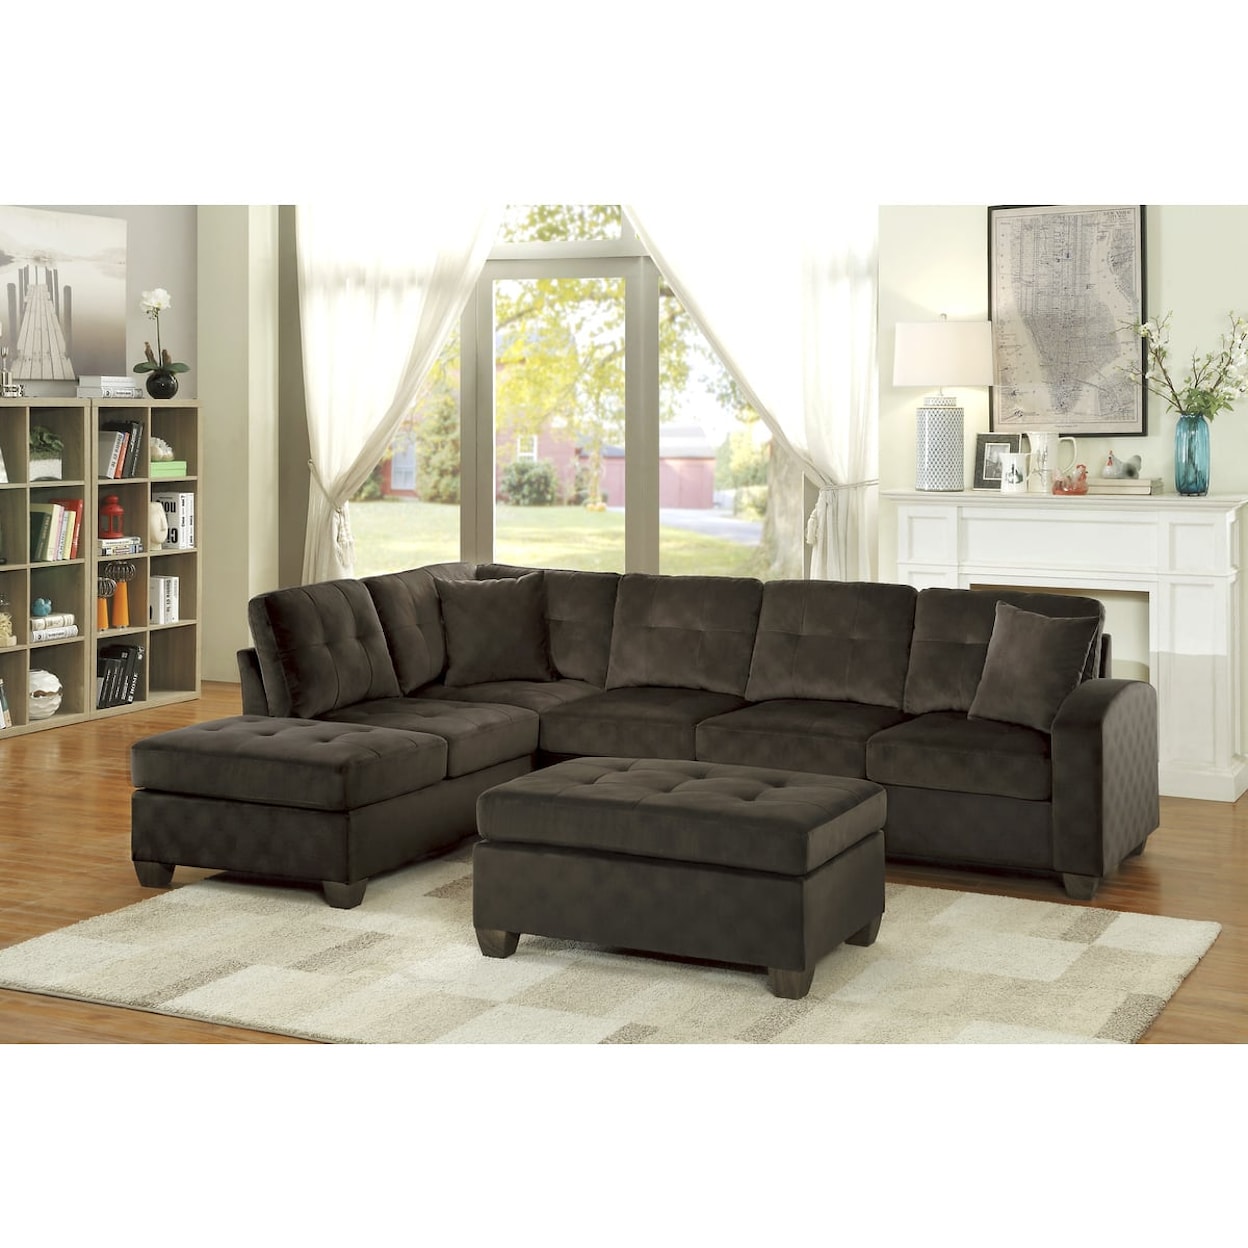 Homelegance Emilio 2-Piece Reversible Sectional